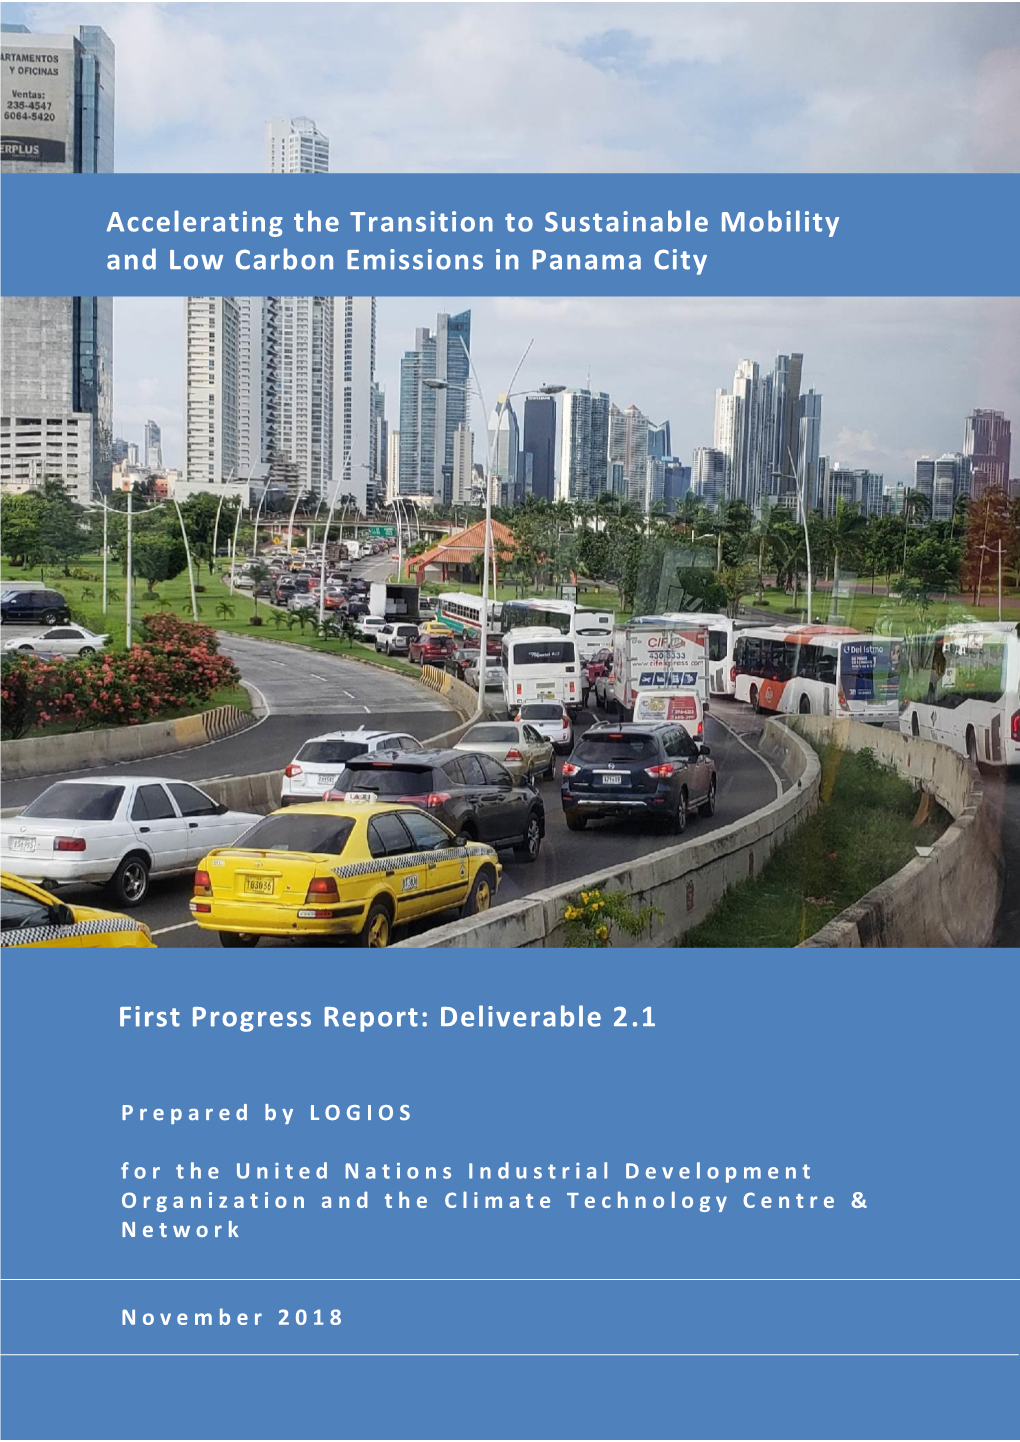 First Progress Report: Deliverable 2.1 Accelerating the Transition To